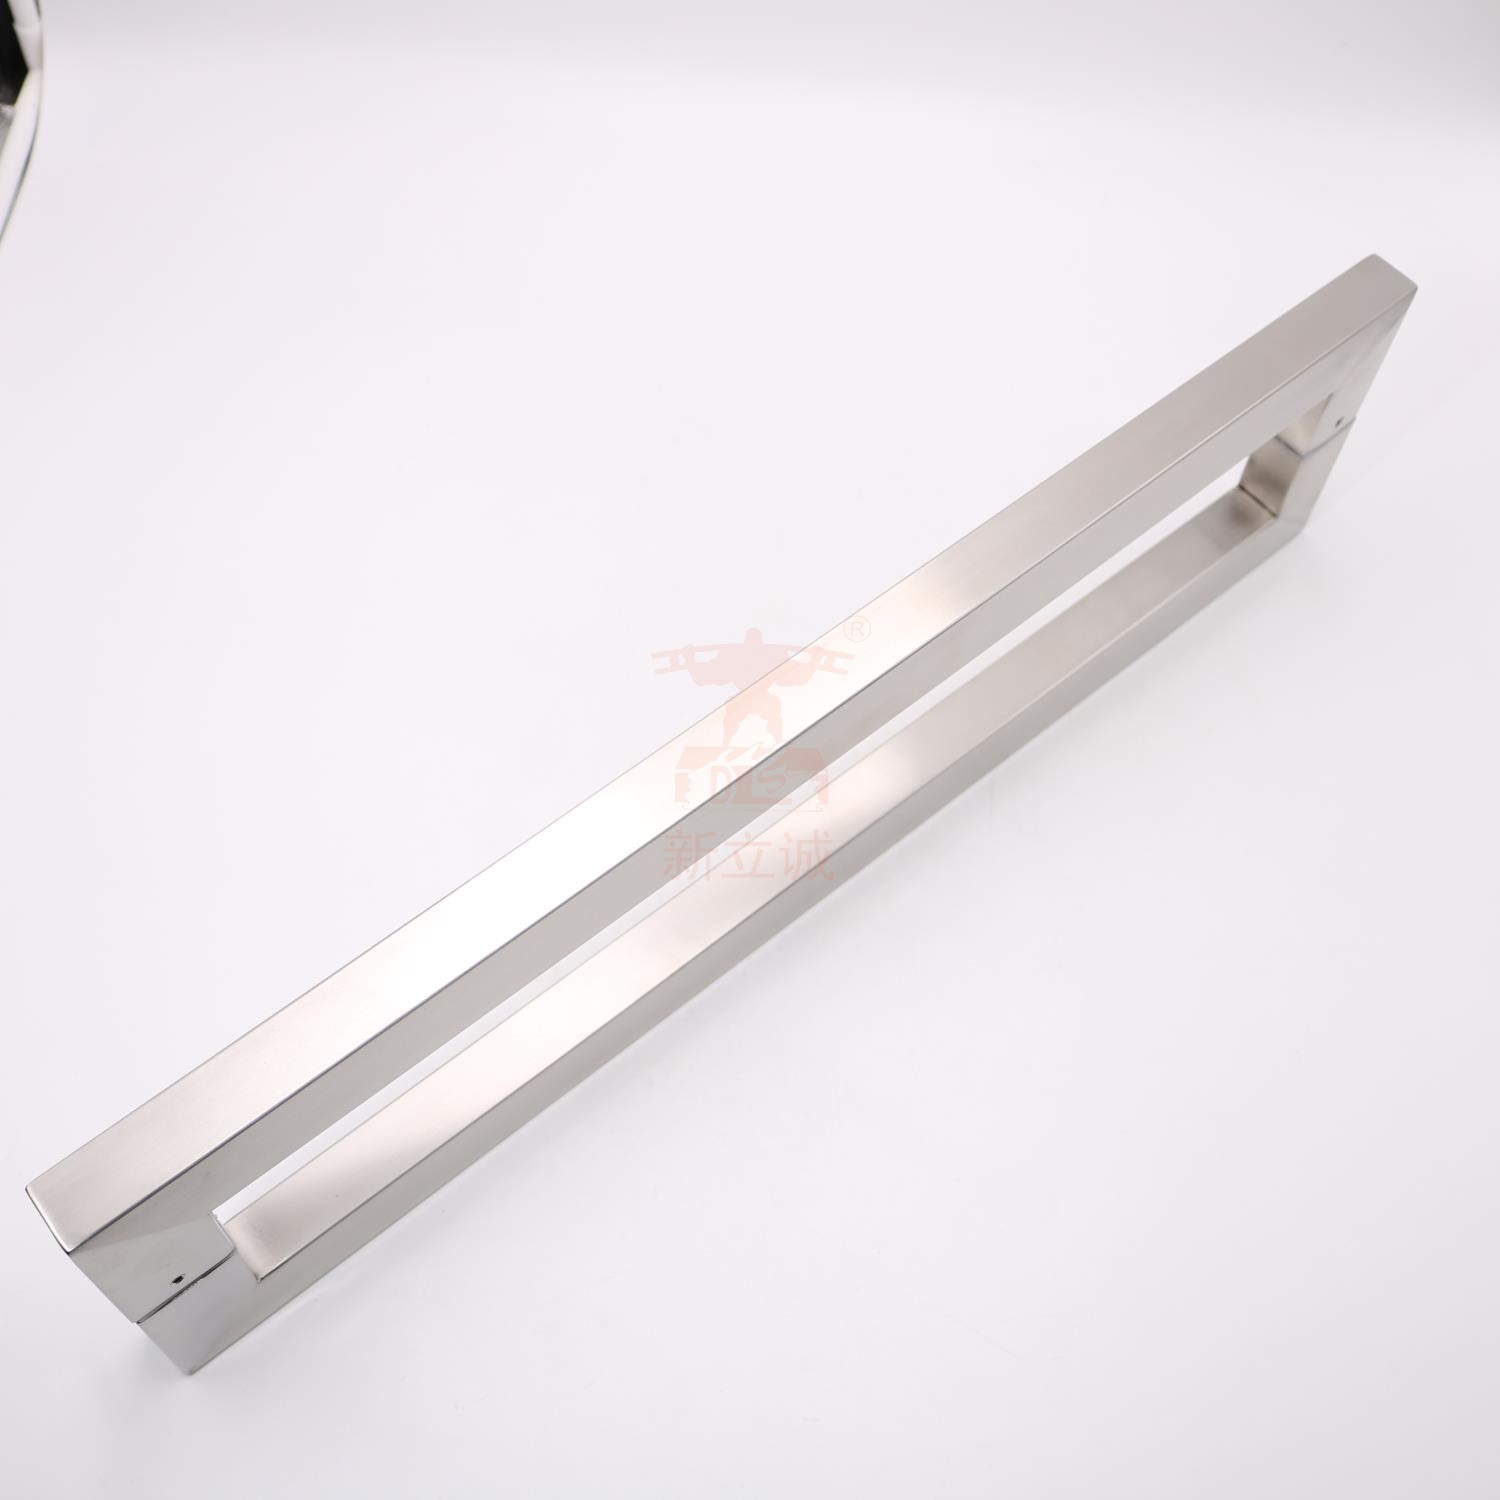 RONGYAO-6035 Stainless Steel Modern Design Glass Door Handles | H Shape Stainless-6